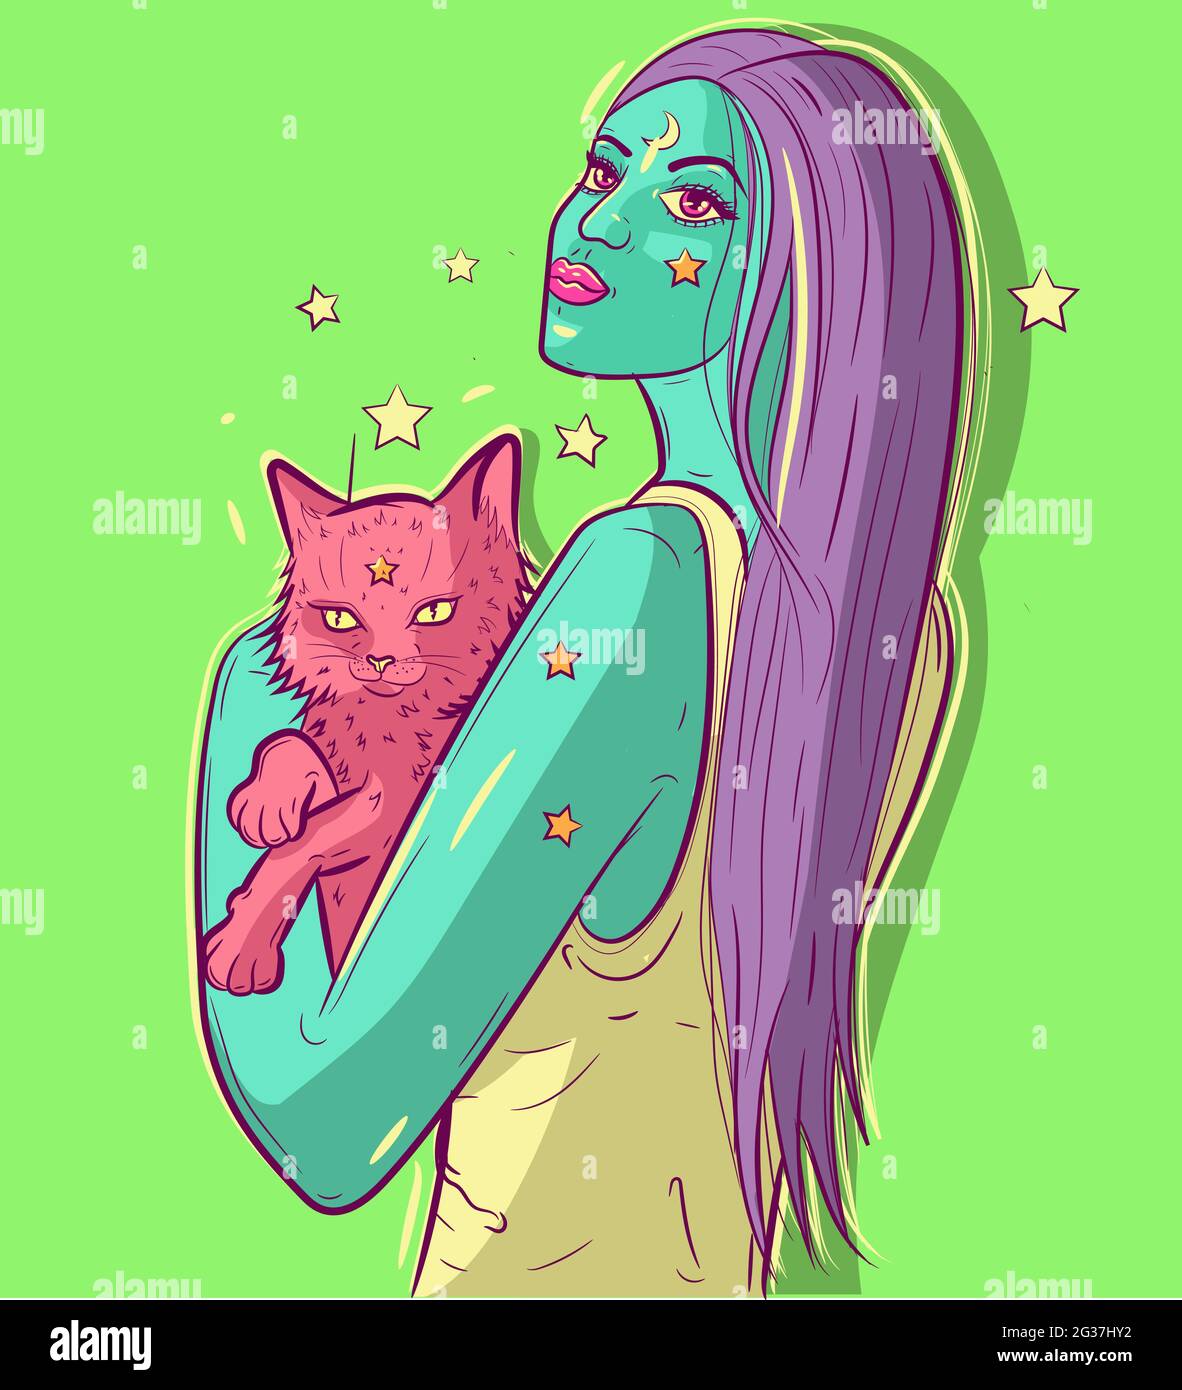 Alien funky woman with green skin holding a pink cat in her arms. Conceptual art of a young creature girl and her pet under neon light. Stock Vector